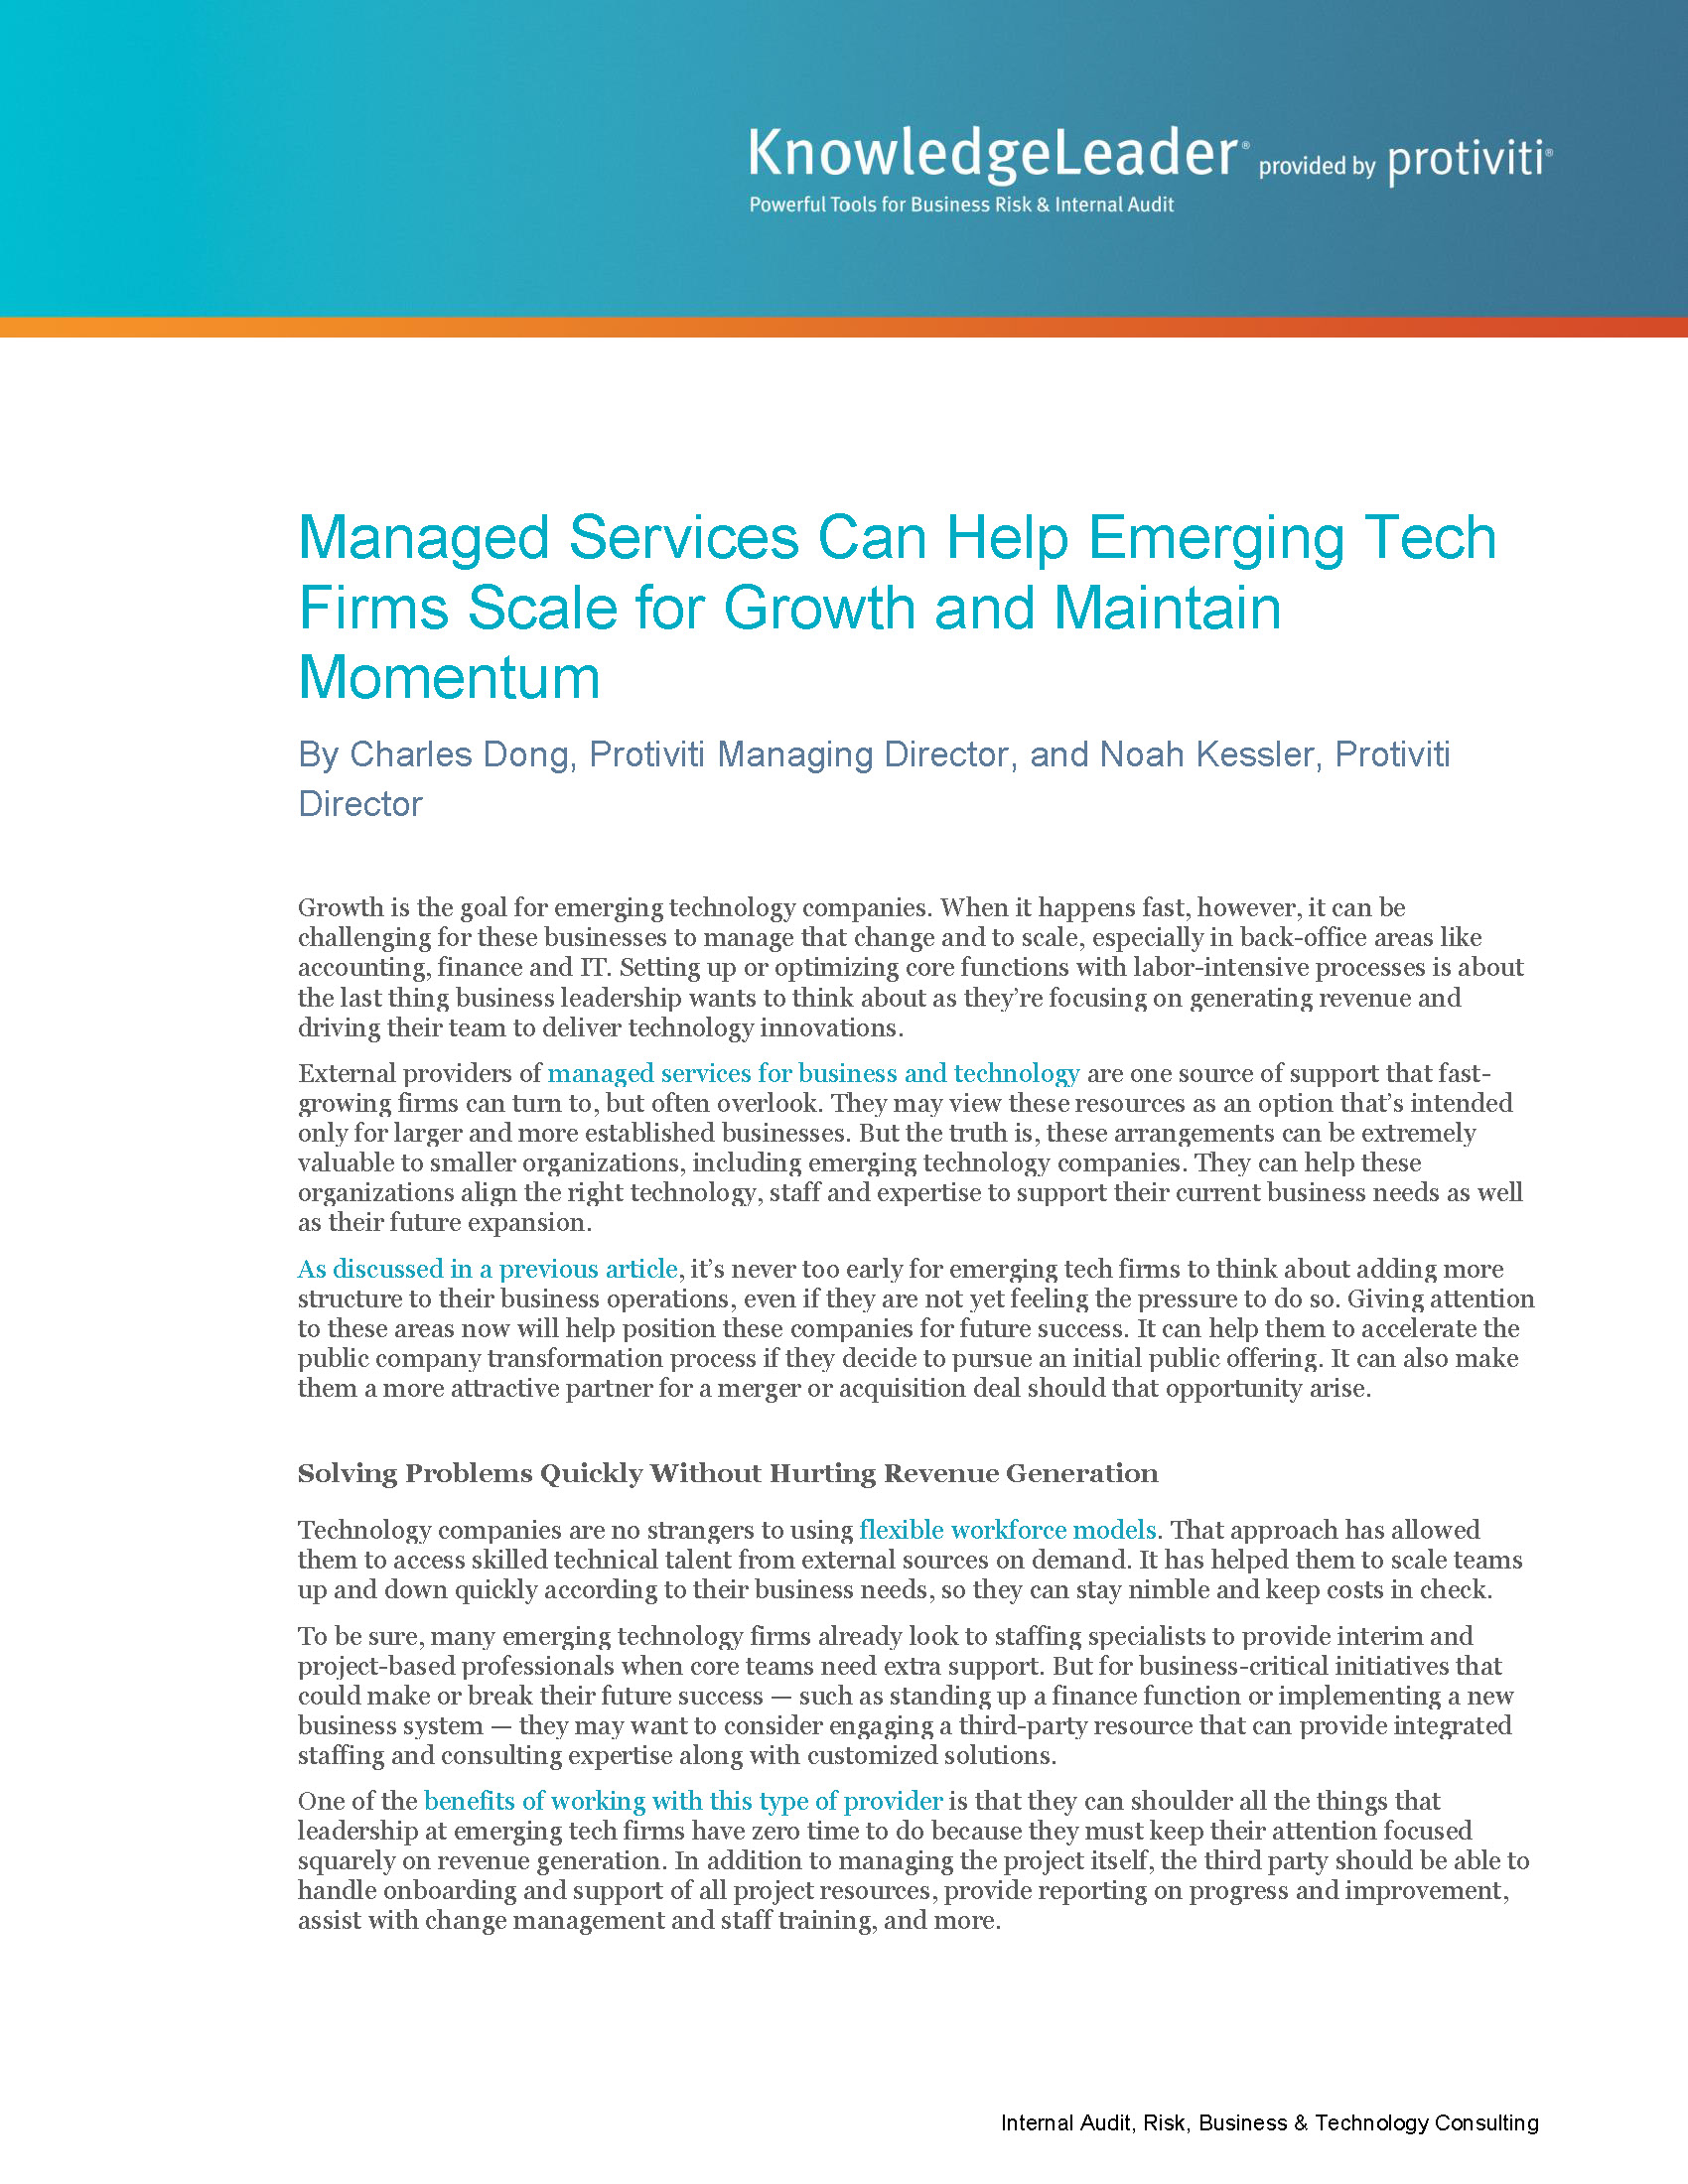 Screenshot of the first page of Managed Services Can Help Emerging Tech Firms Scale for Growth and Maintain Momentum